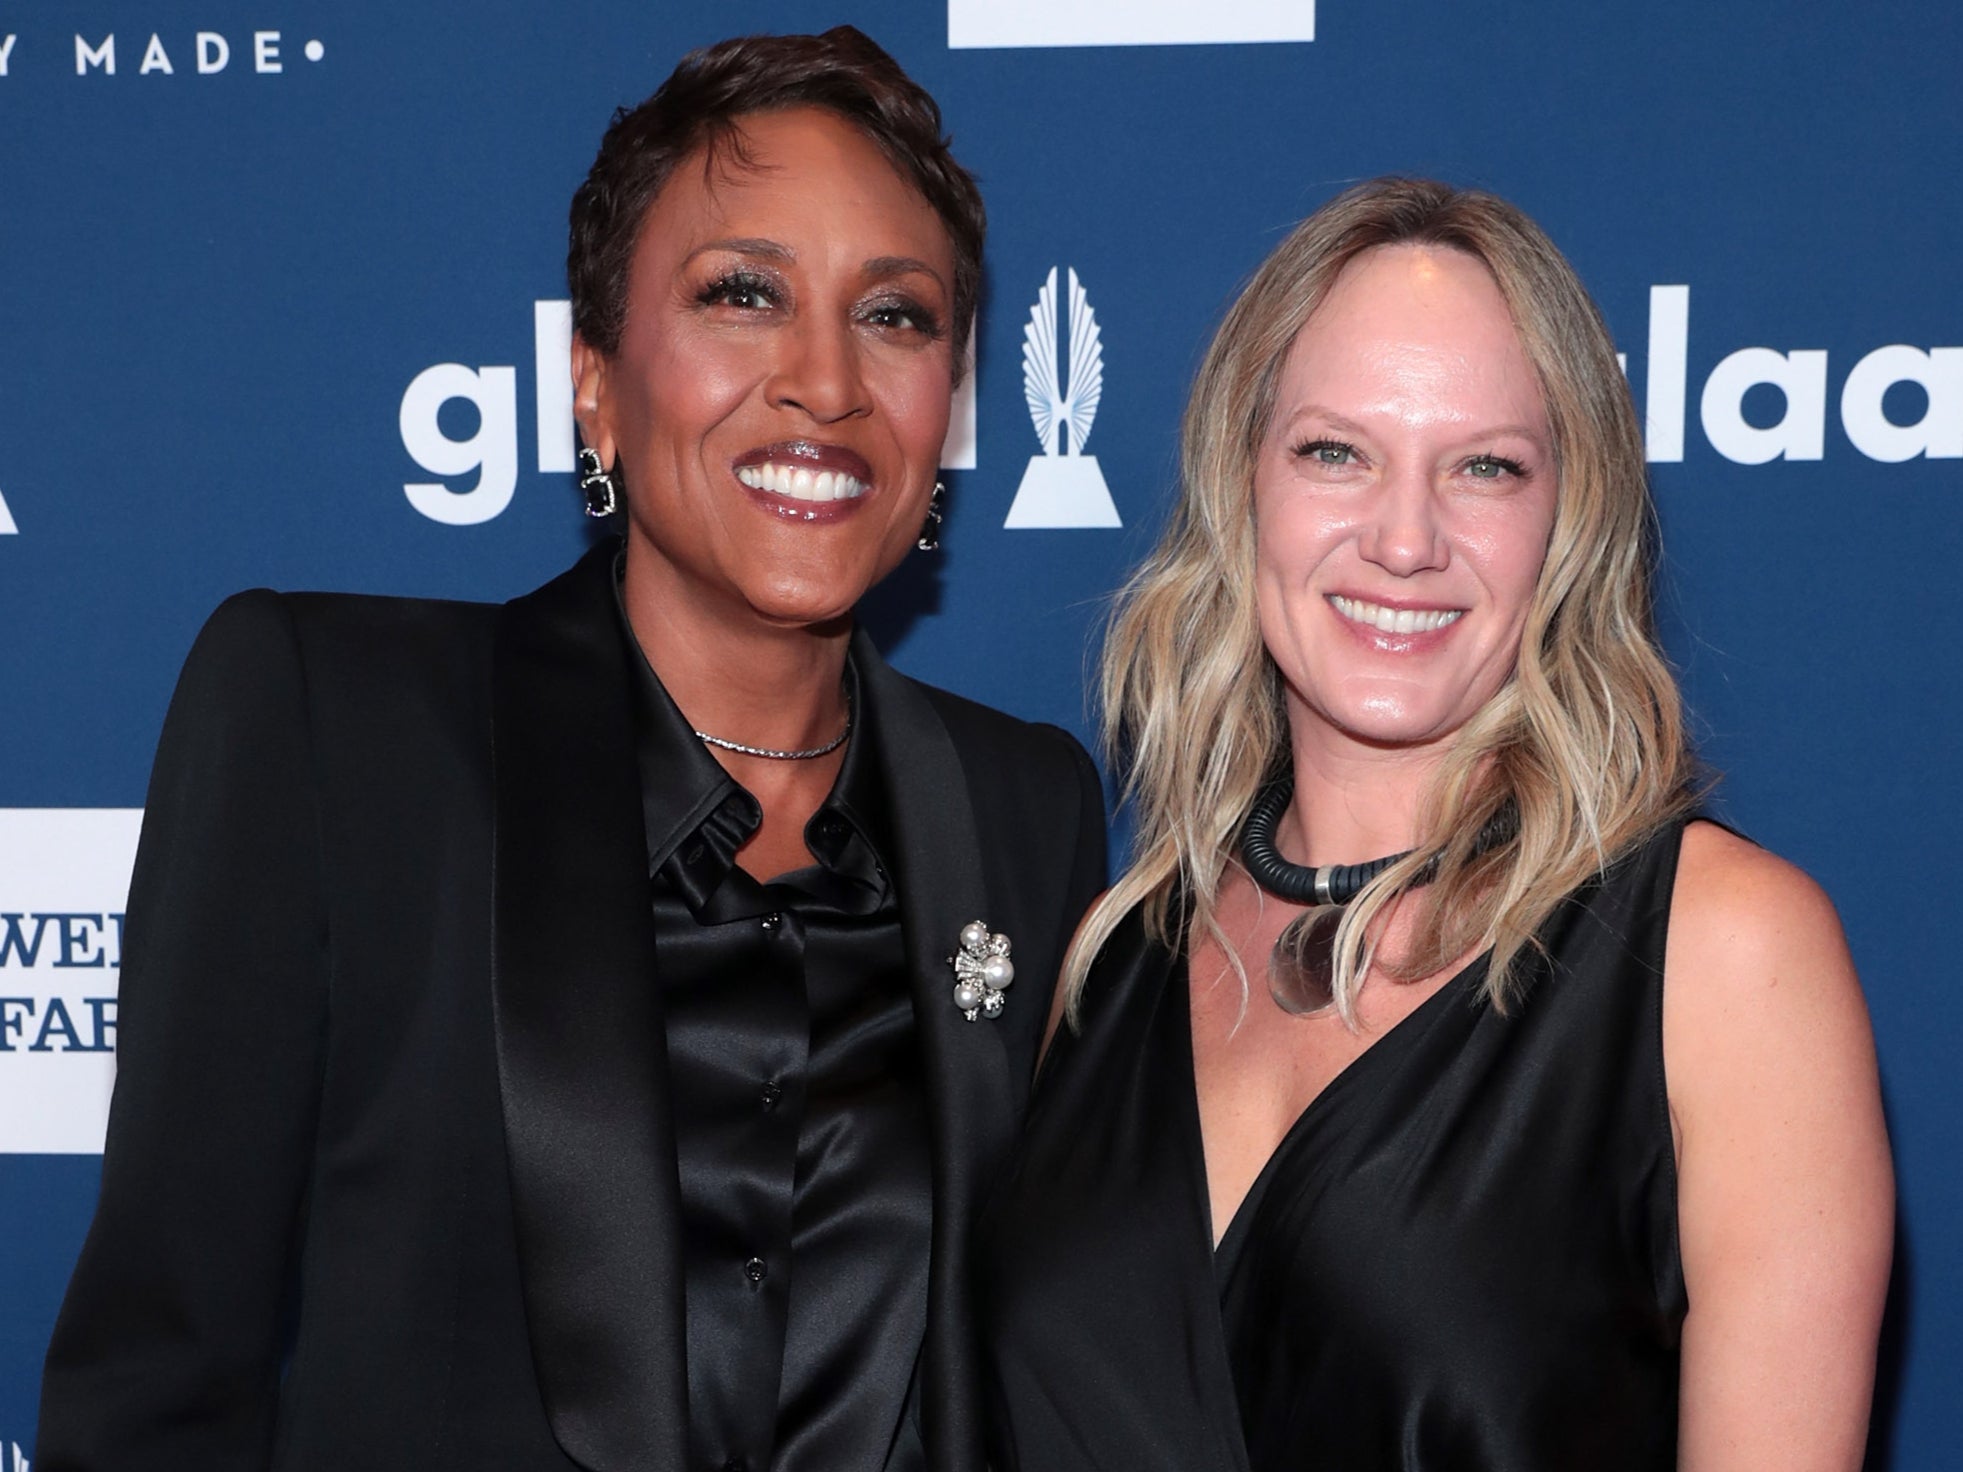 Robin Roberts and Amber Laign attend the 29th Annual GLAAD Media Awards on 5 May 2018 in New York City